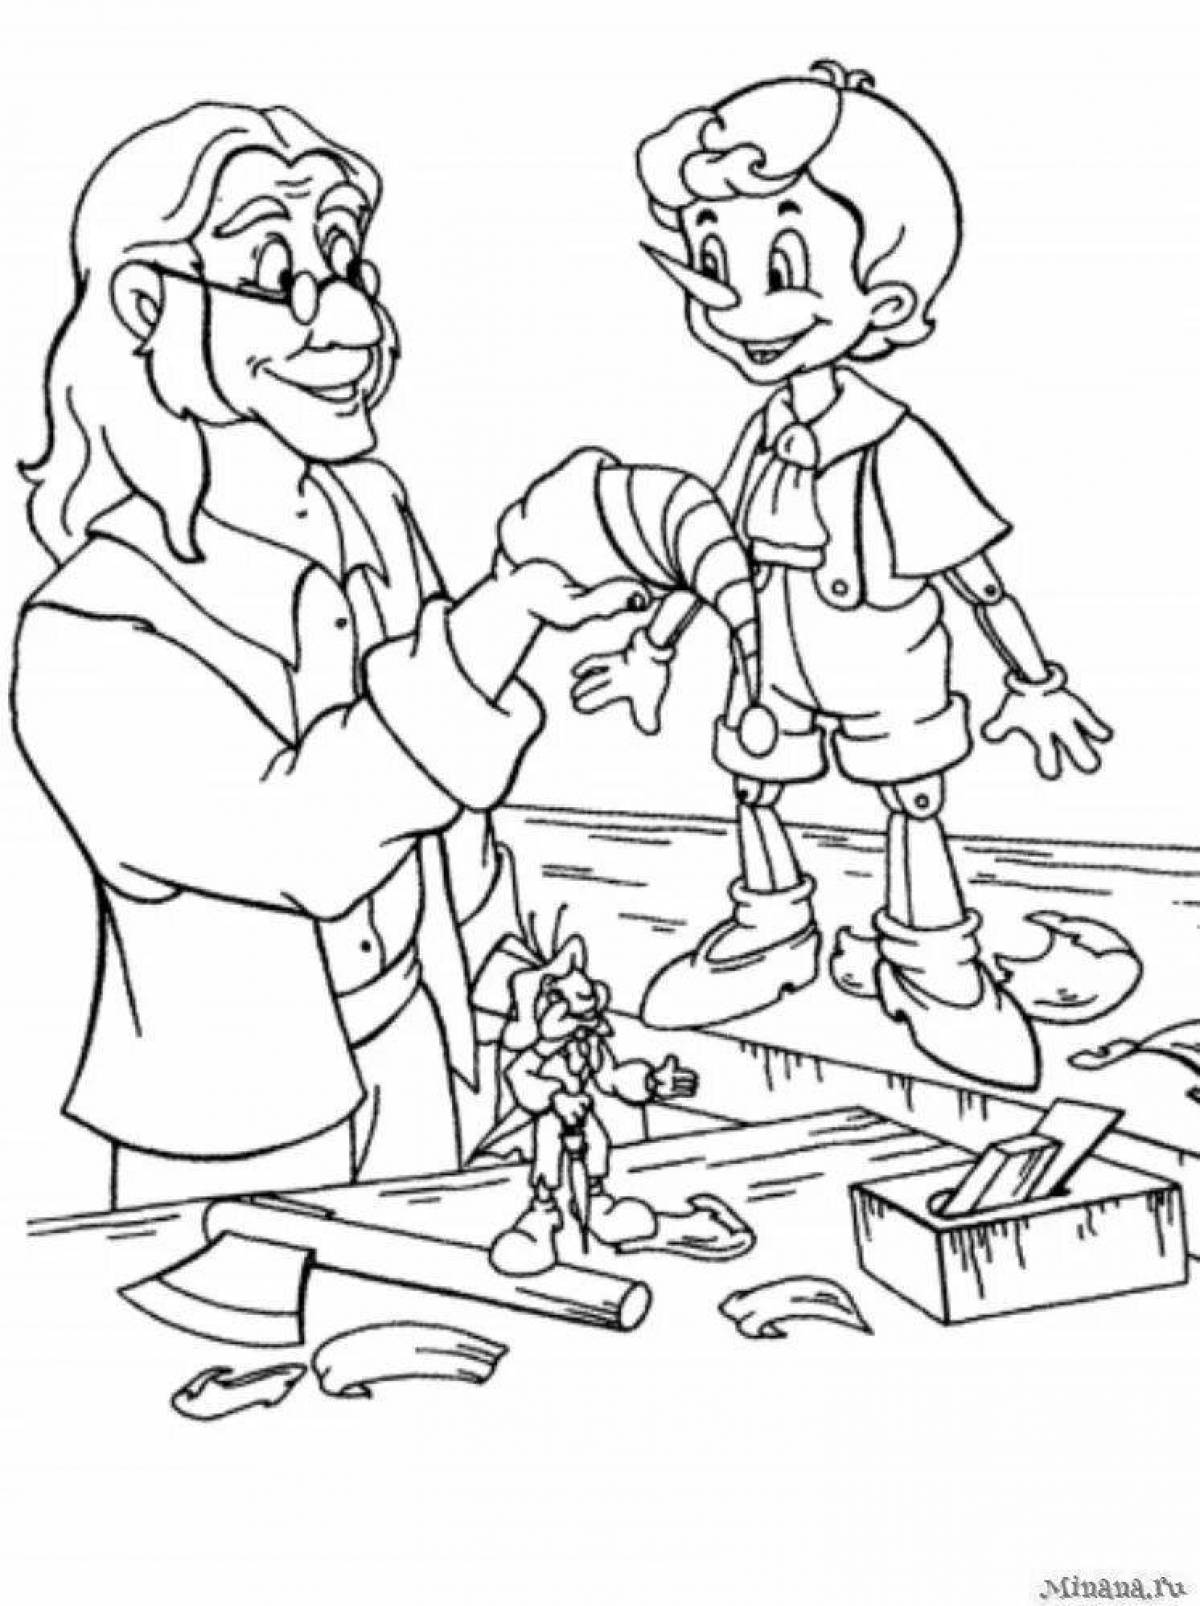 Coloring page glorious pinocchio